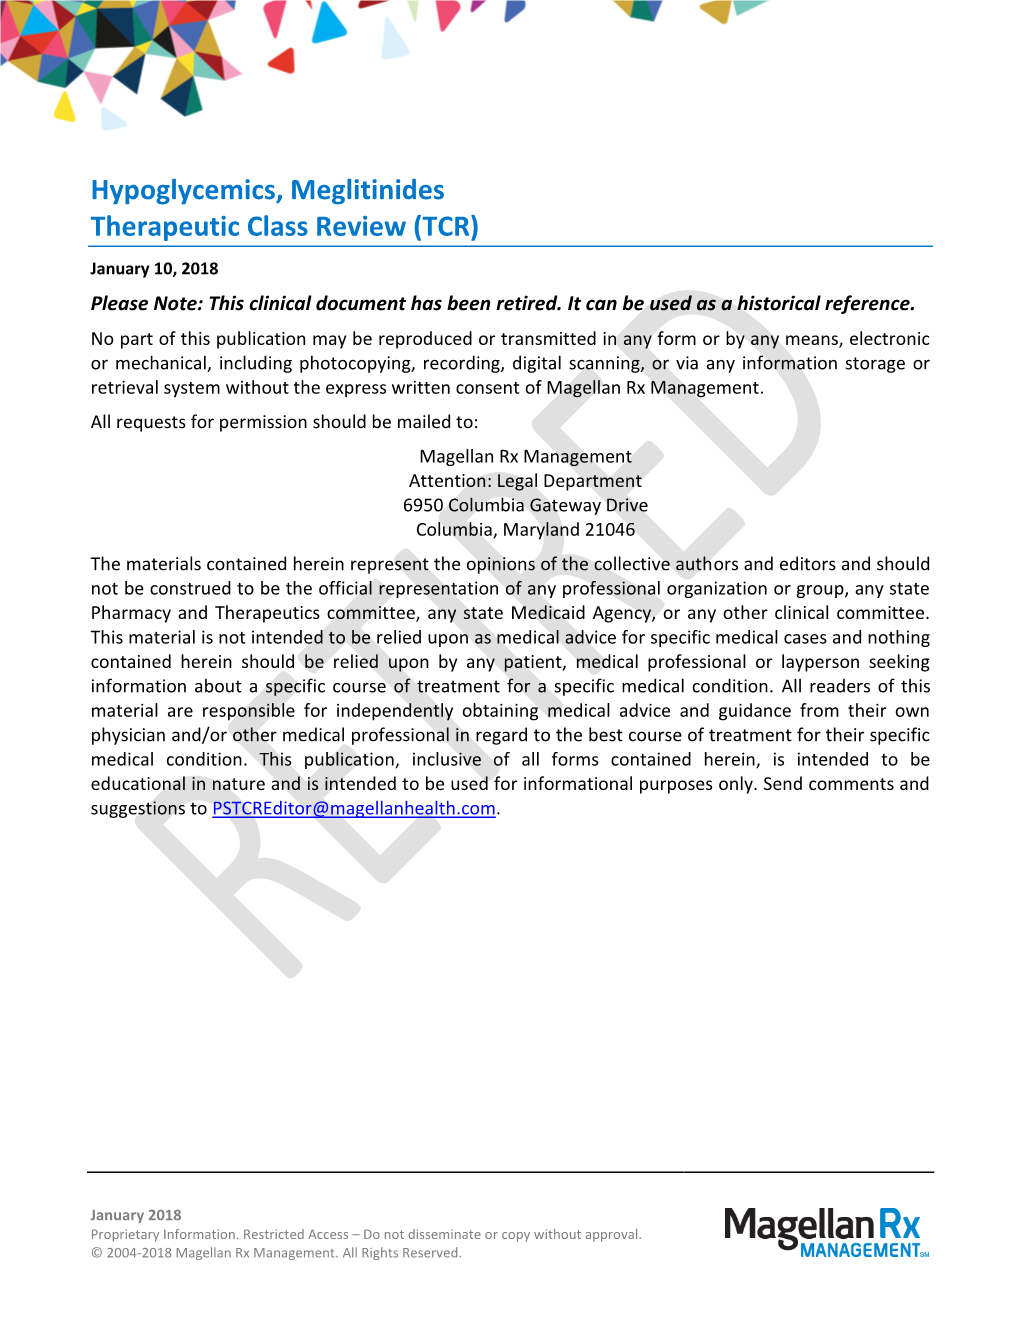 Hypoglycemics, Meglitinides Therapeutic Class Review (TCR) January 10, 2018 Please Note: This Clinical Document Has Been Retired